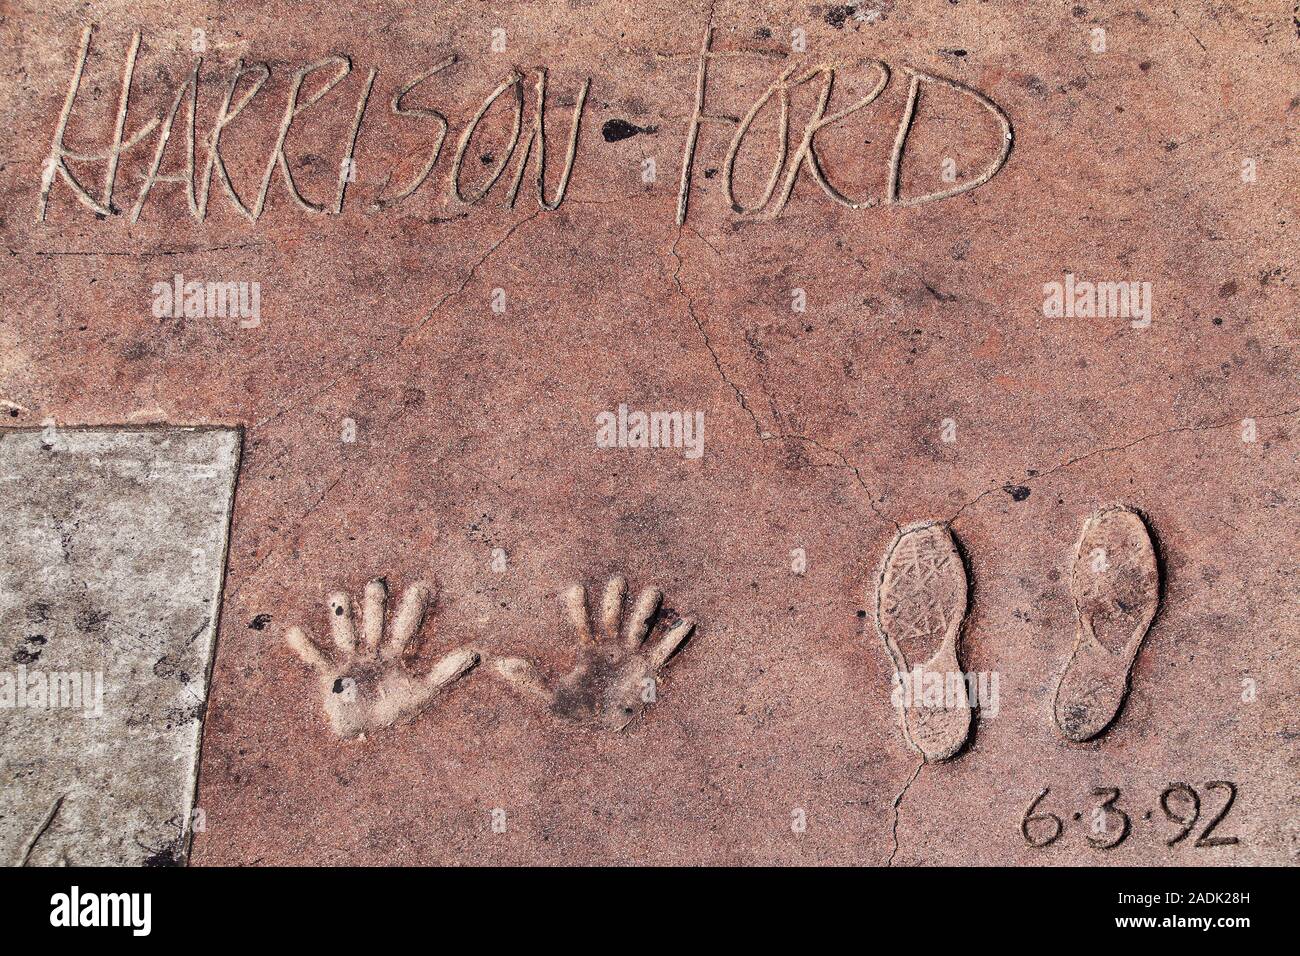 Los Angeles, California - September 07, 2019: Hand and footprints of actor Harrison Ford in the Grauman's Chinese Theatre forecourt, Hollywood. Stock Photo